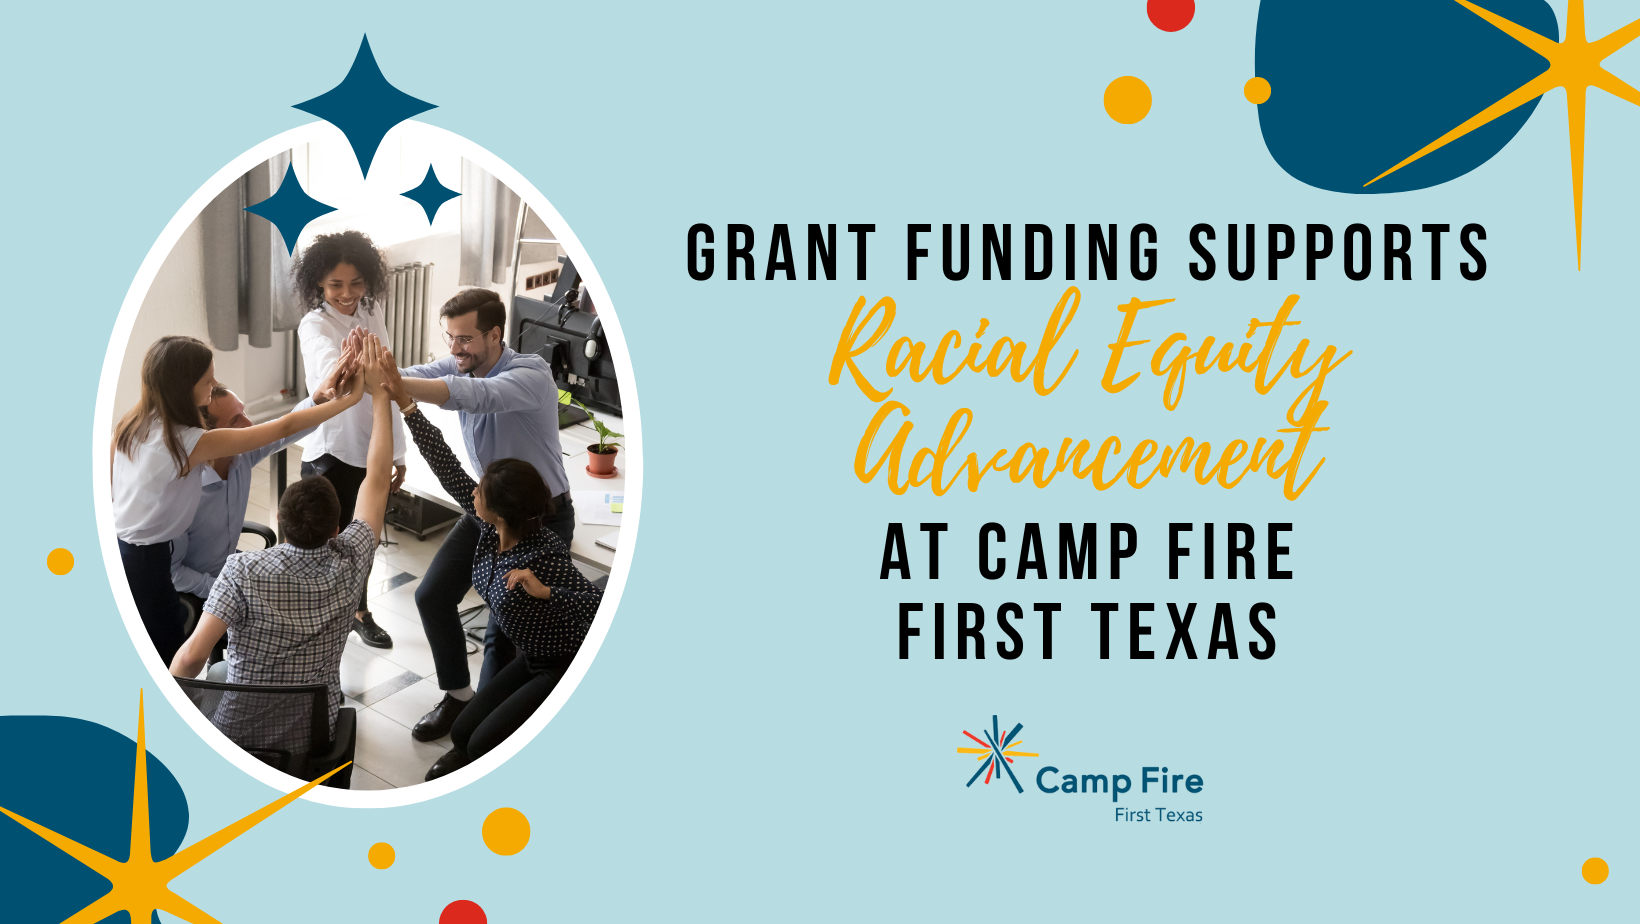 Grant Funding Supports Racial Equity Advancement at Camp Fire First Texas, a Camp Fire First Texas blog